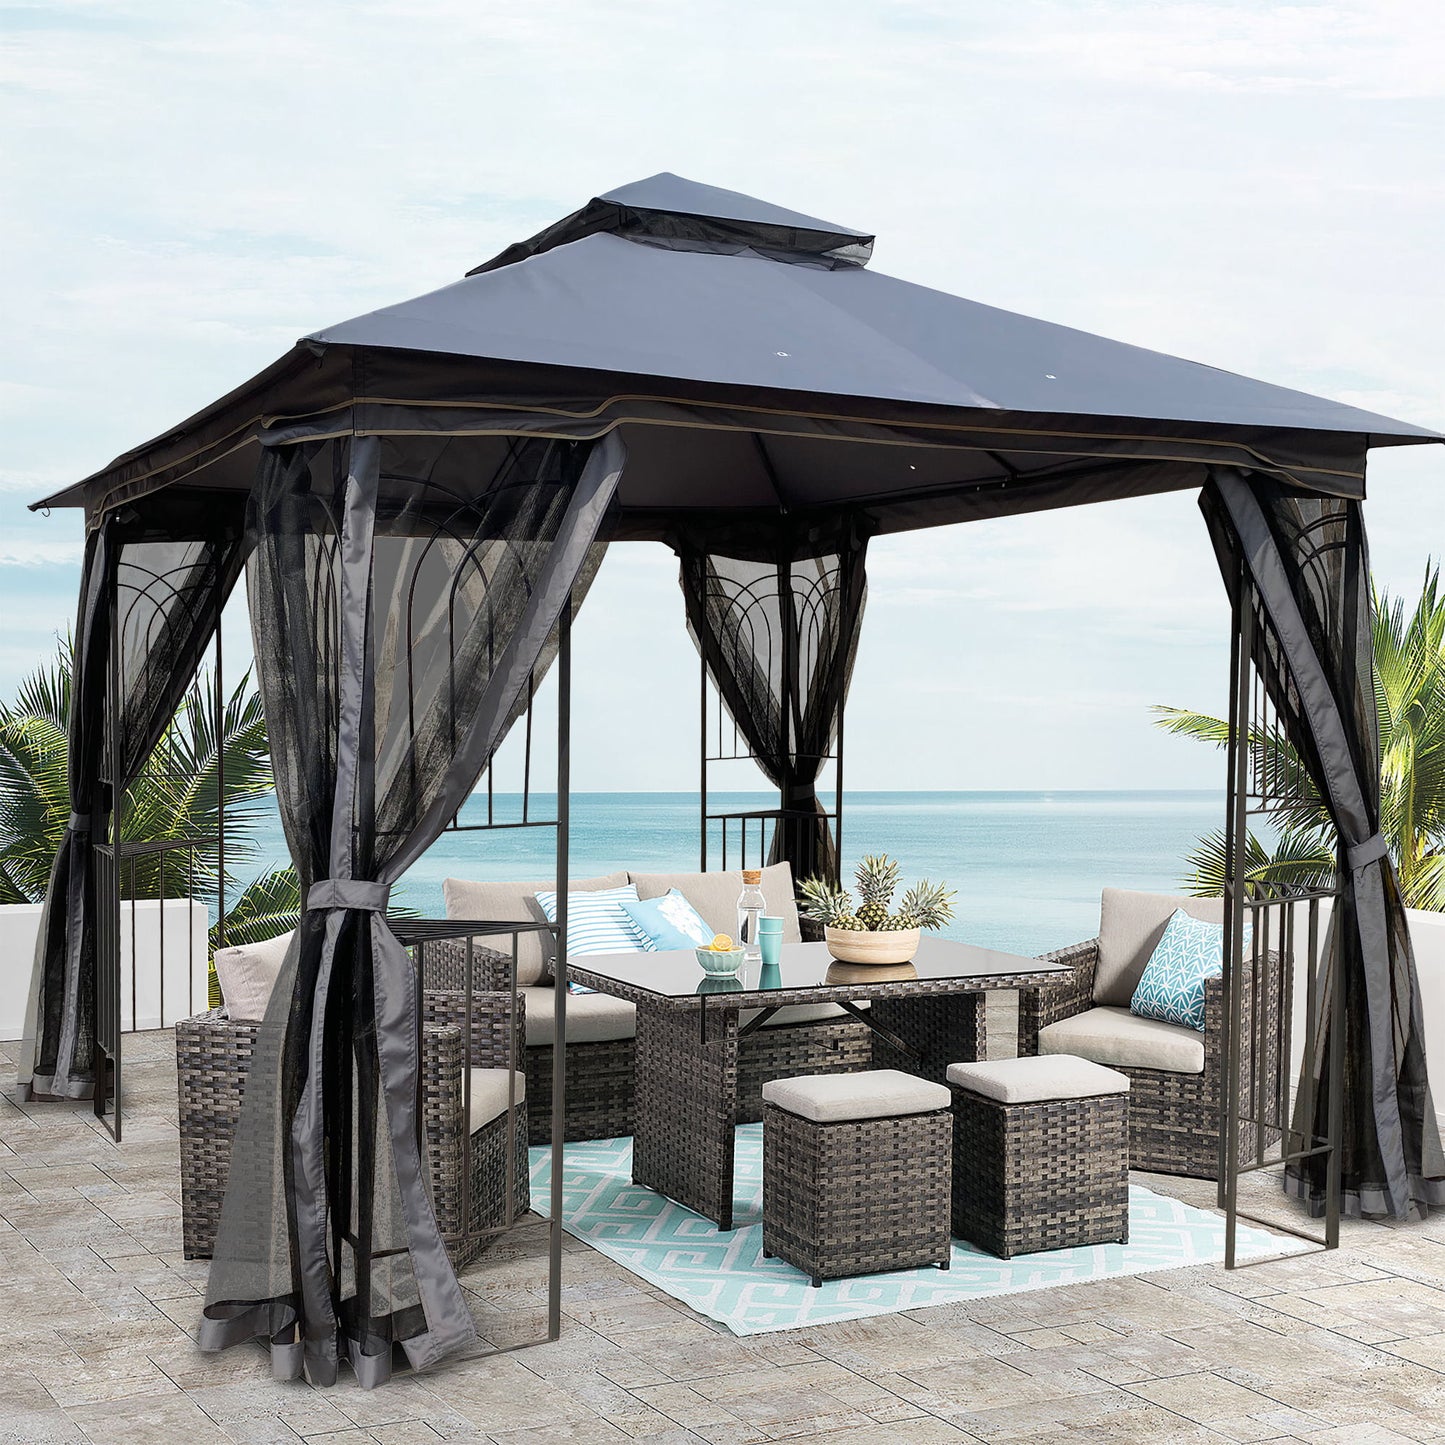 SYNGAR Canopy Tents for Outside 10 x 10 ft, Gazebo Tent Outdoor Canopy Shelter with Double Roof and Sturdy Frame, Pergolas Gazebos and Canopies for Backyard Lawn Garden and Deck, Gray